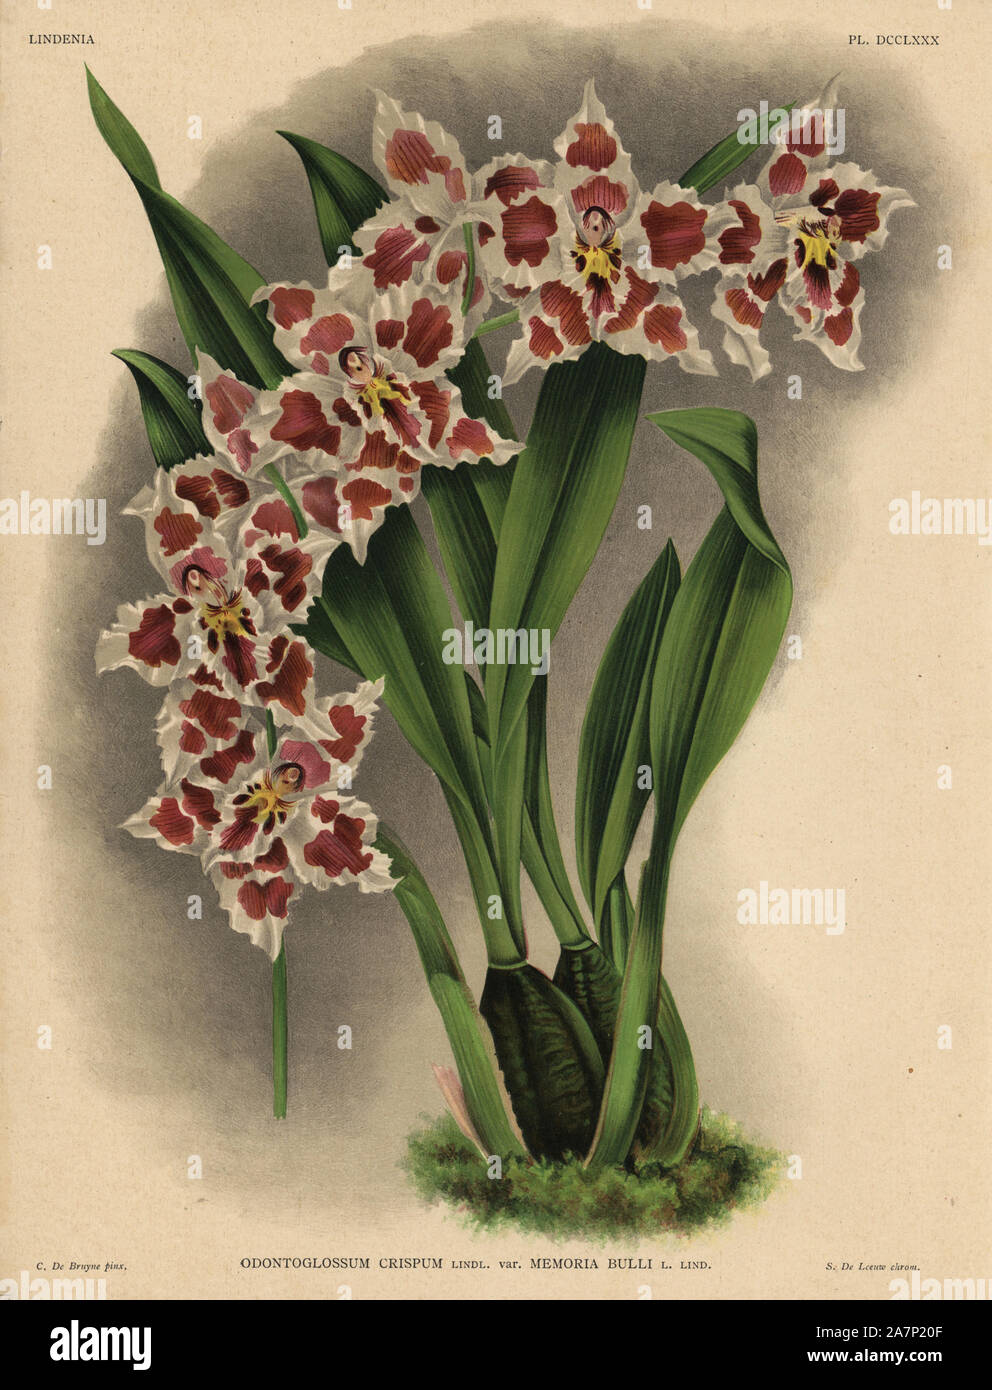 Memoria Bulli variety of Odontoglossum crispum orchid. Illustration drawn by C. de Bruyne and chromolithographed by S. de Leeuw from Lucien Linden's "Lindenia, Iconographie des Orchidees," Brussels, 1902. Stock Photo